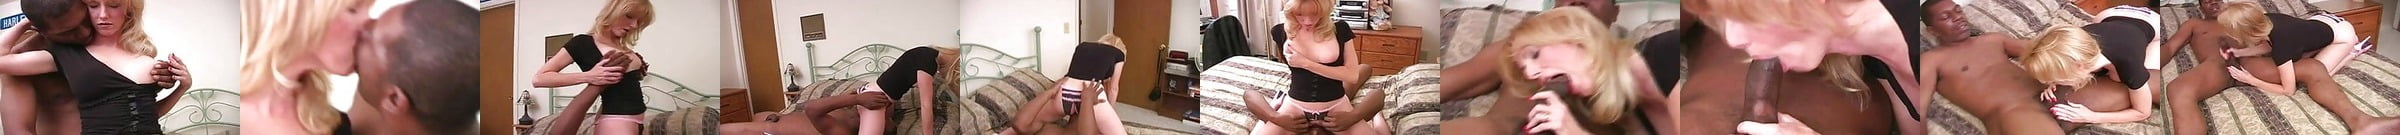 Husband Watches Wife Suck Another Man S Dick Free Porn 43 Xhamster